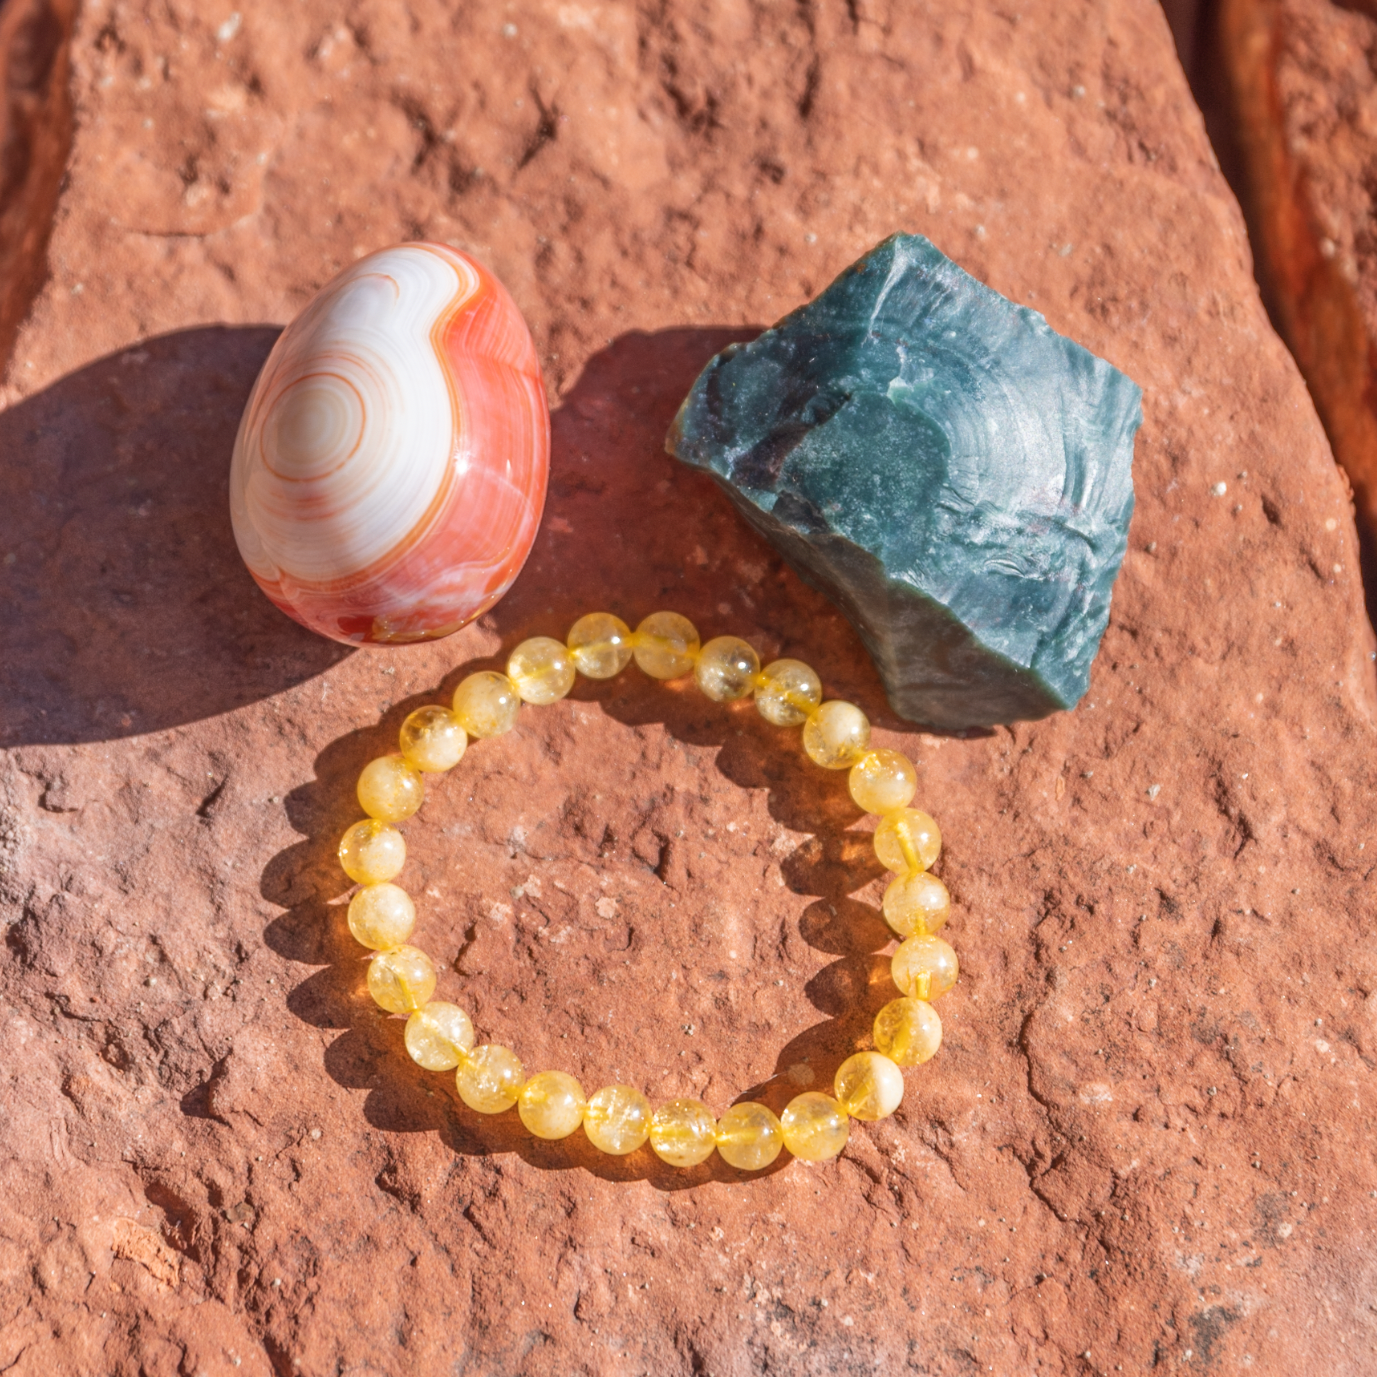 healing crystals: a bundle of crystals used to help with energy in sedona, arizona